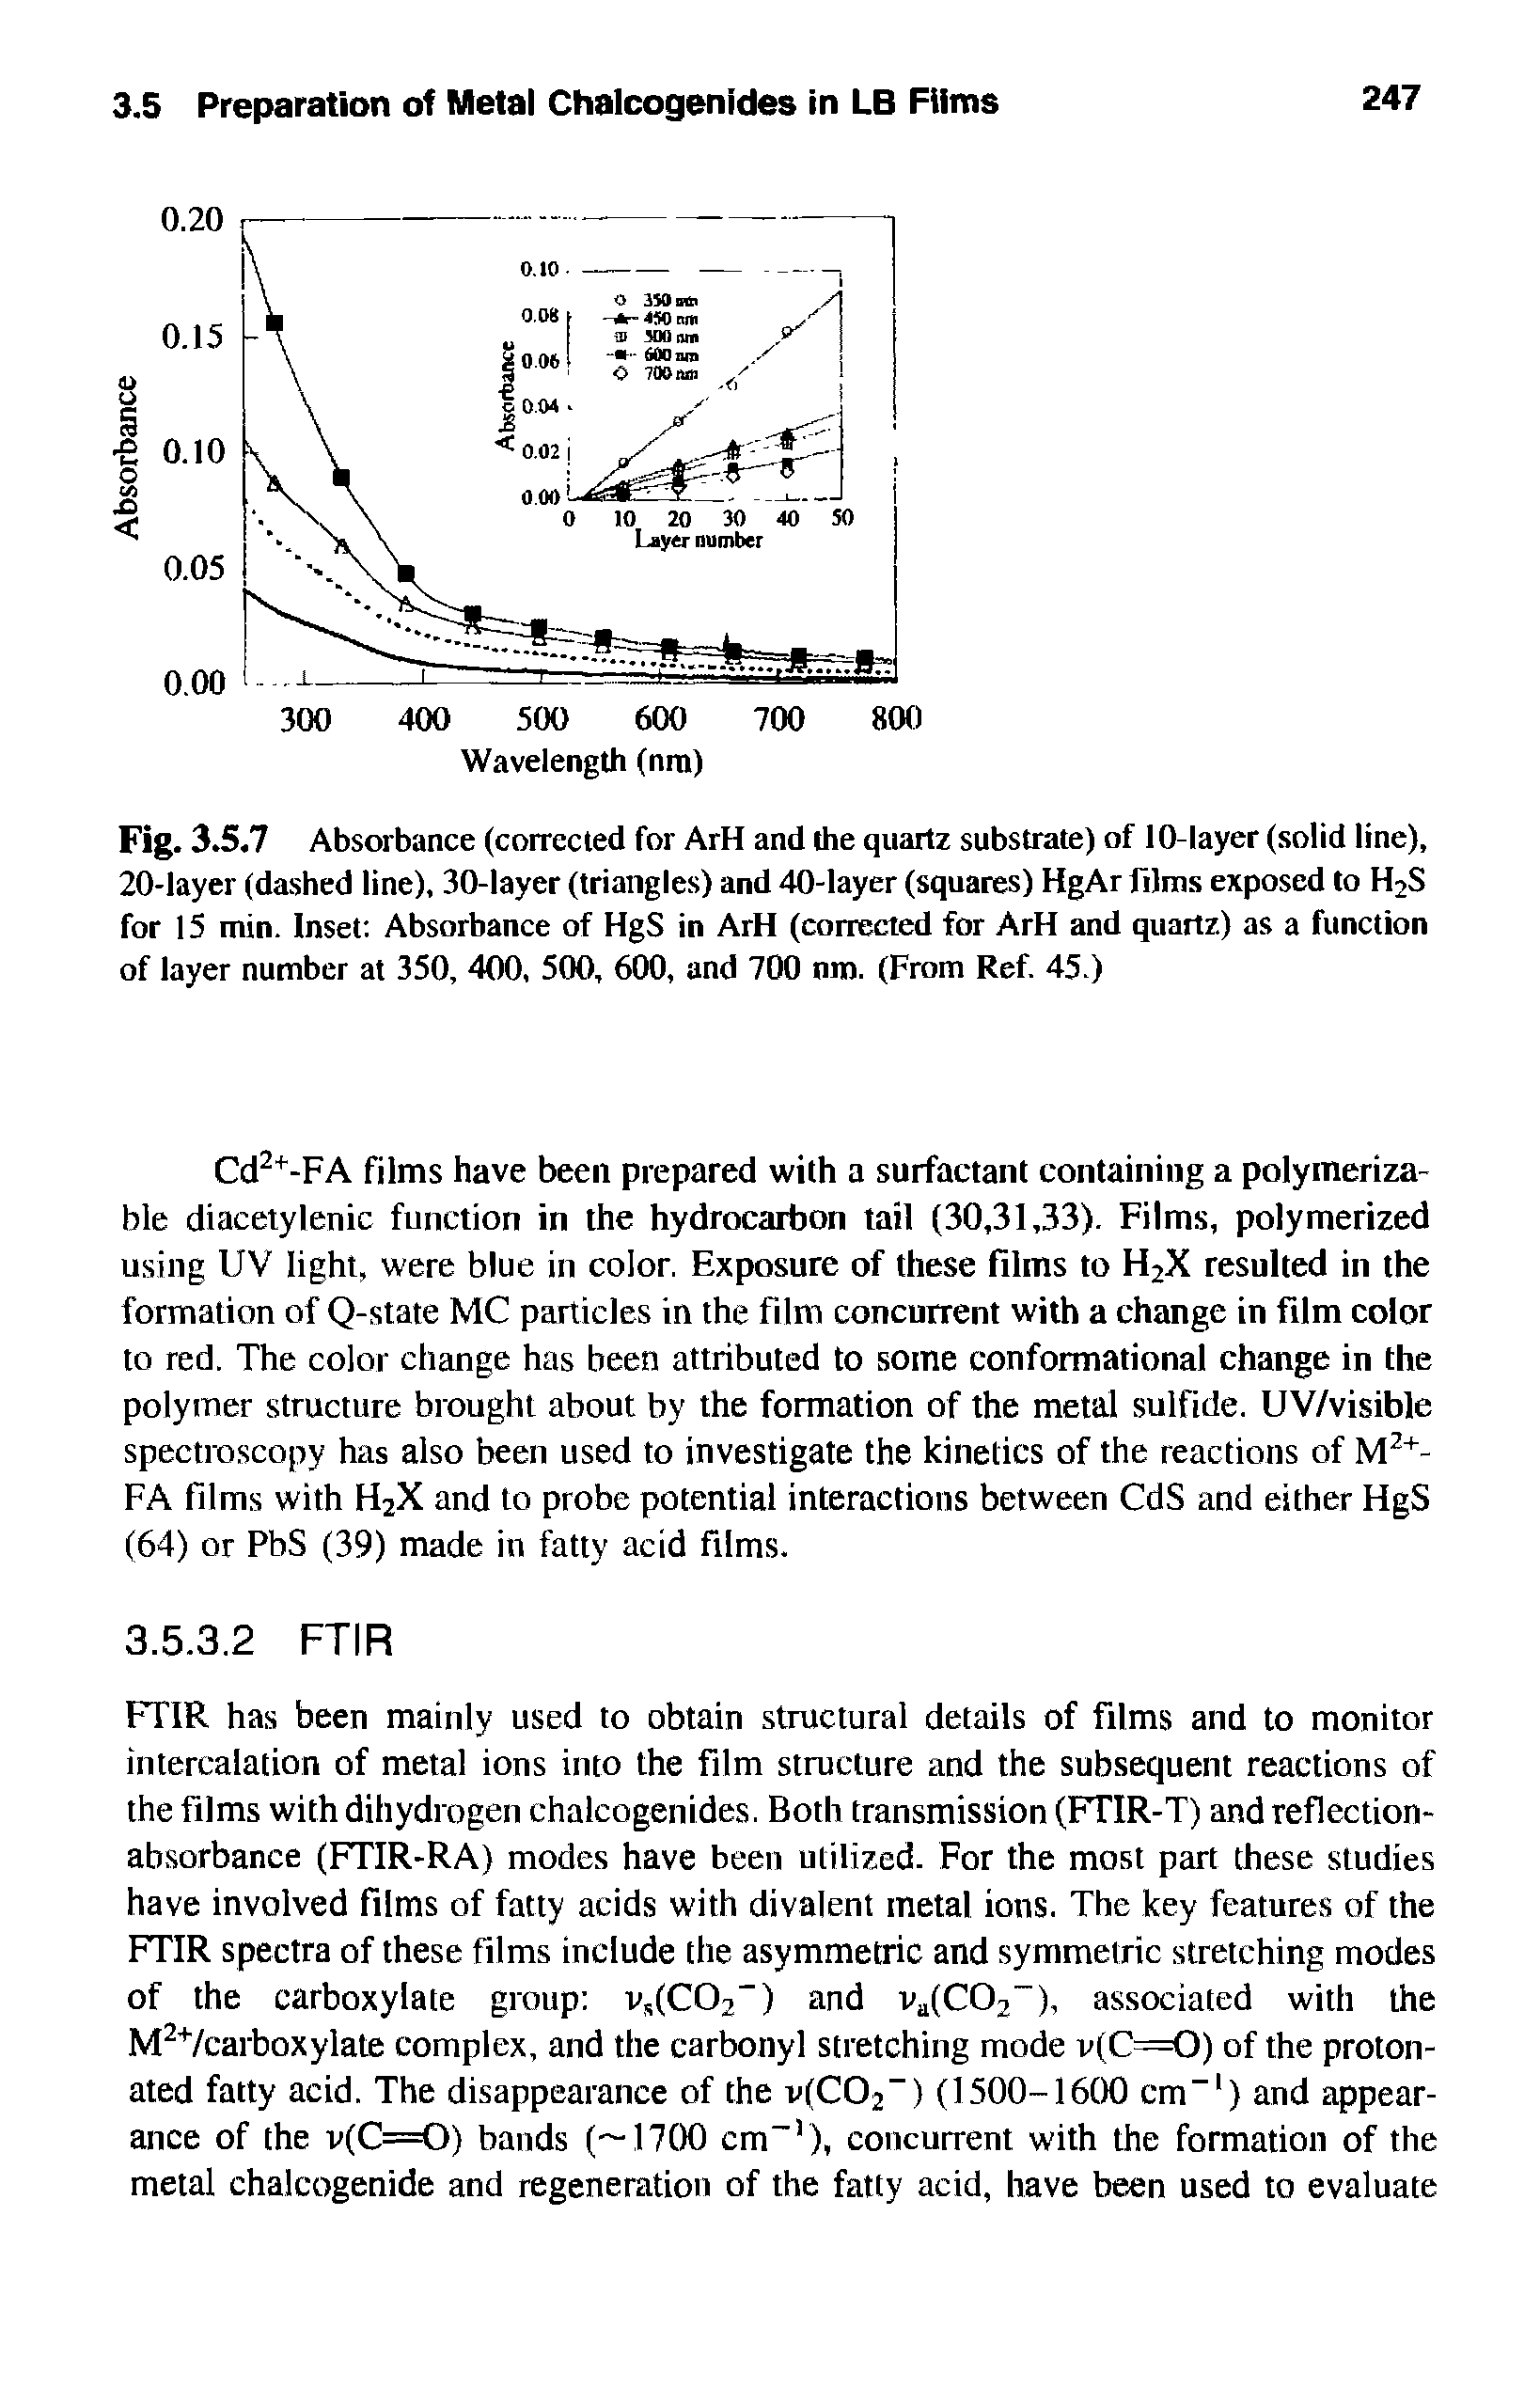 Fig. 3.5.7 Absorbance (corrected for ArH and the quartz substrate) of 10-layer (solid line), 20-layer (dashed line), 30-layer (triangles) and 40-layer (squares) HgAr films exposed to H2S for 15 min. Inset Absorbance of HgS in ArH (corrected for ArH and quartz) as a function of layer number at 350, 400, 500, 600, and 700 nm. (From Ref. 45.)...